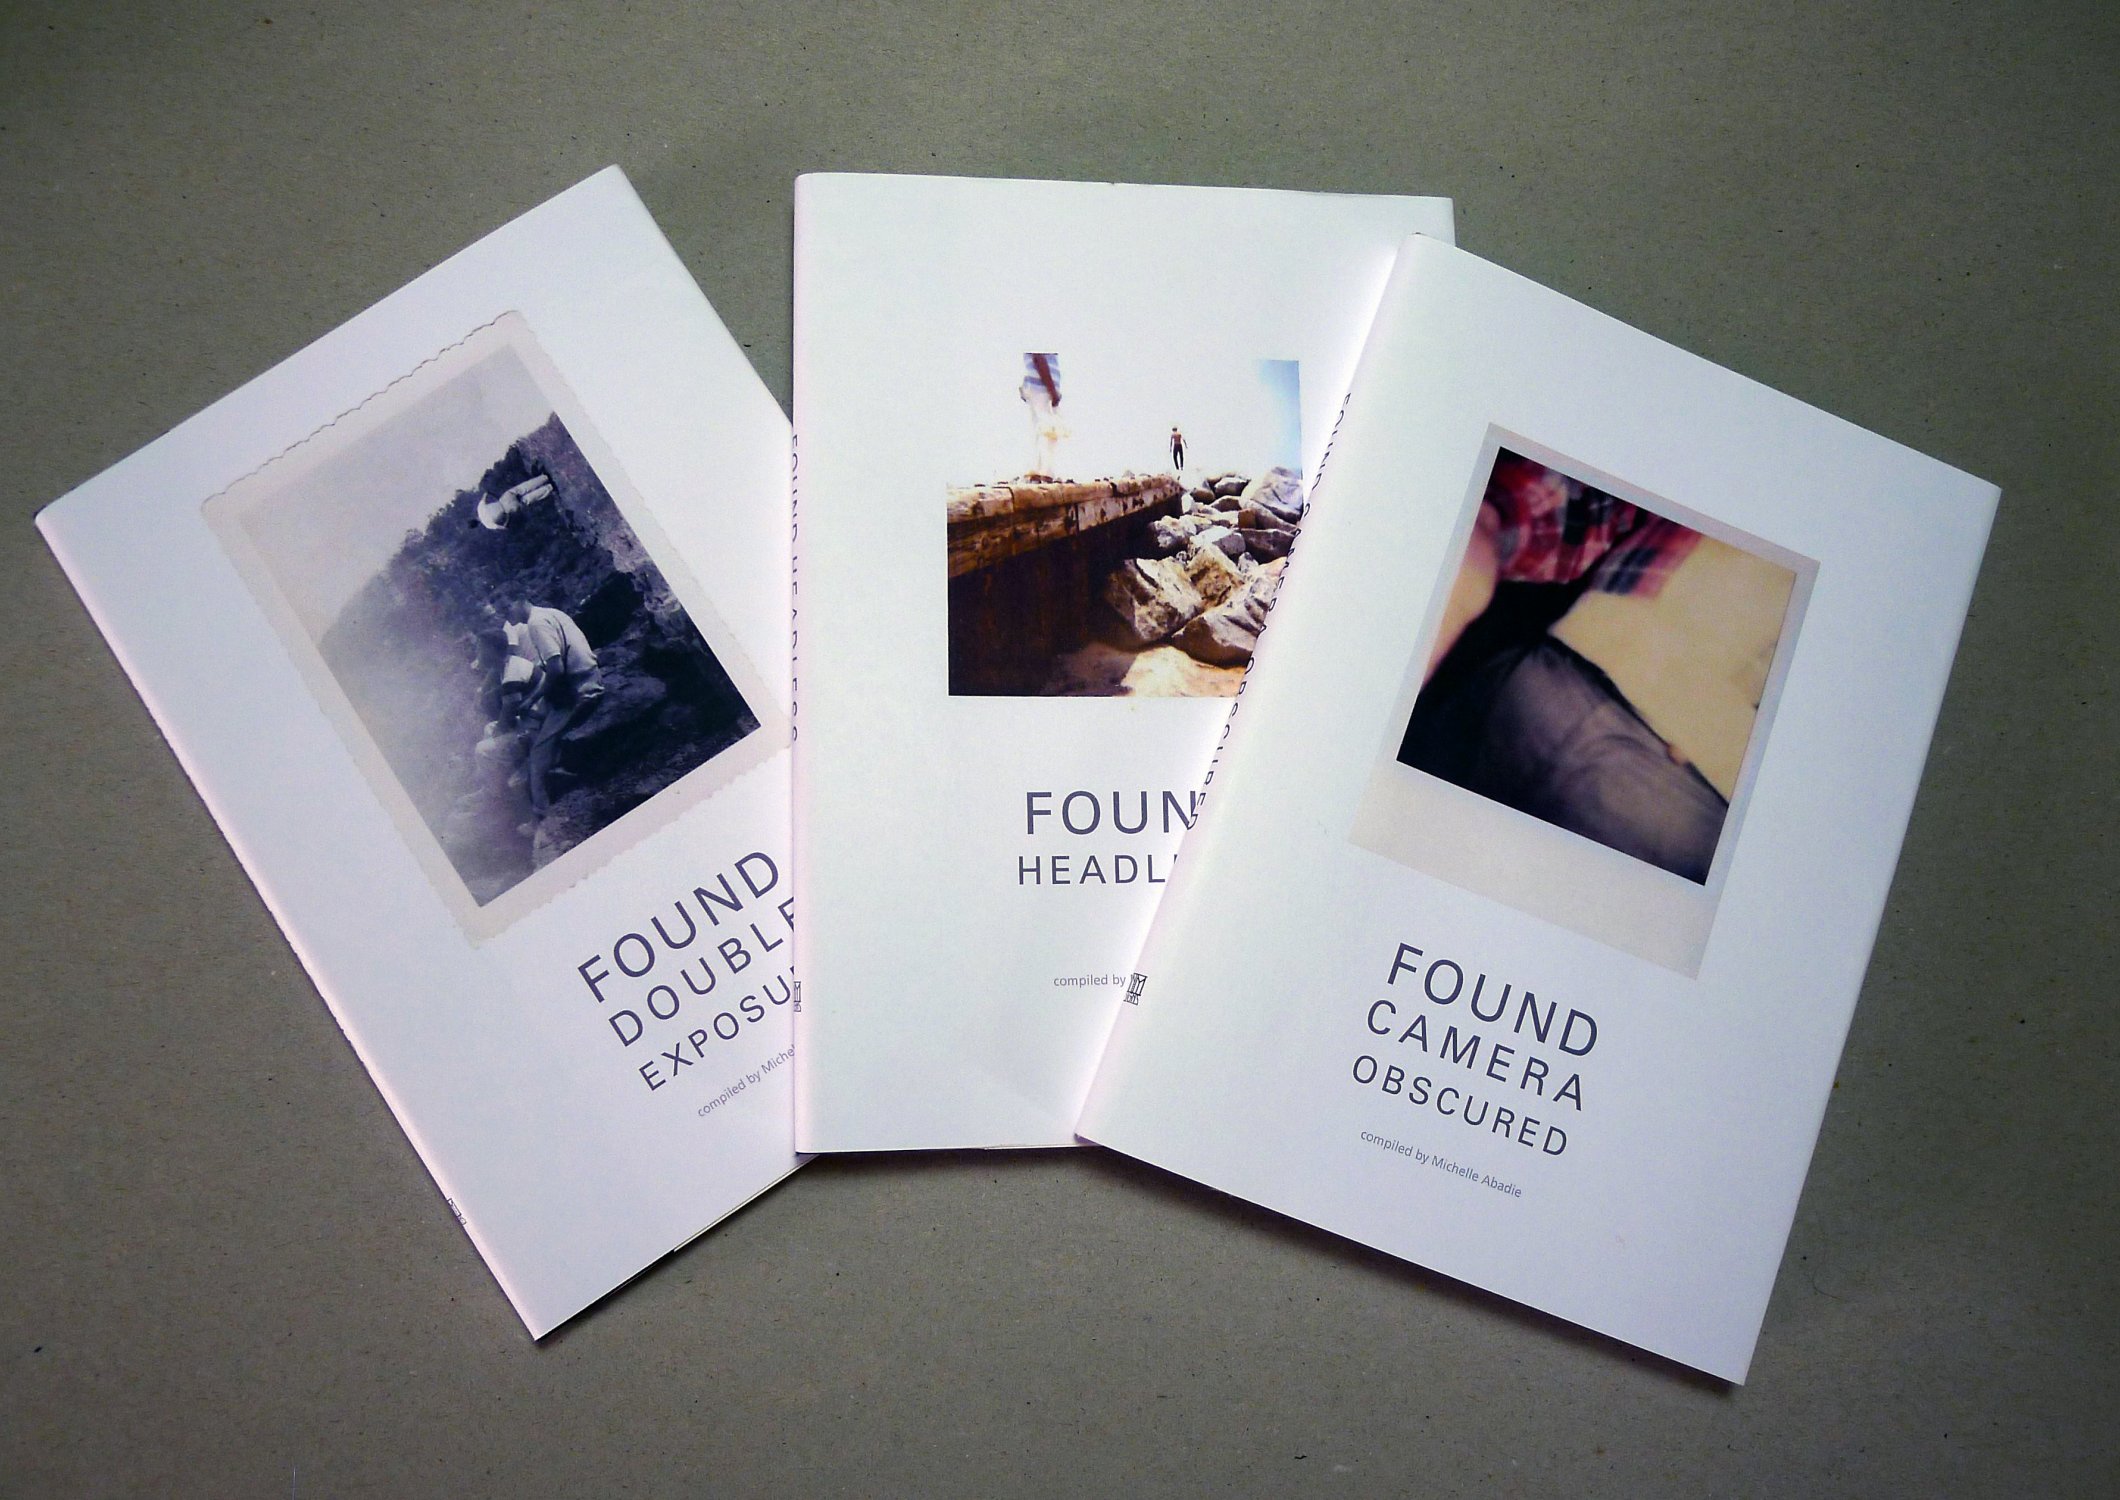 found photography collections handmade books